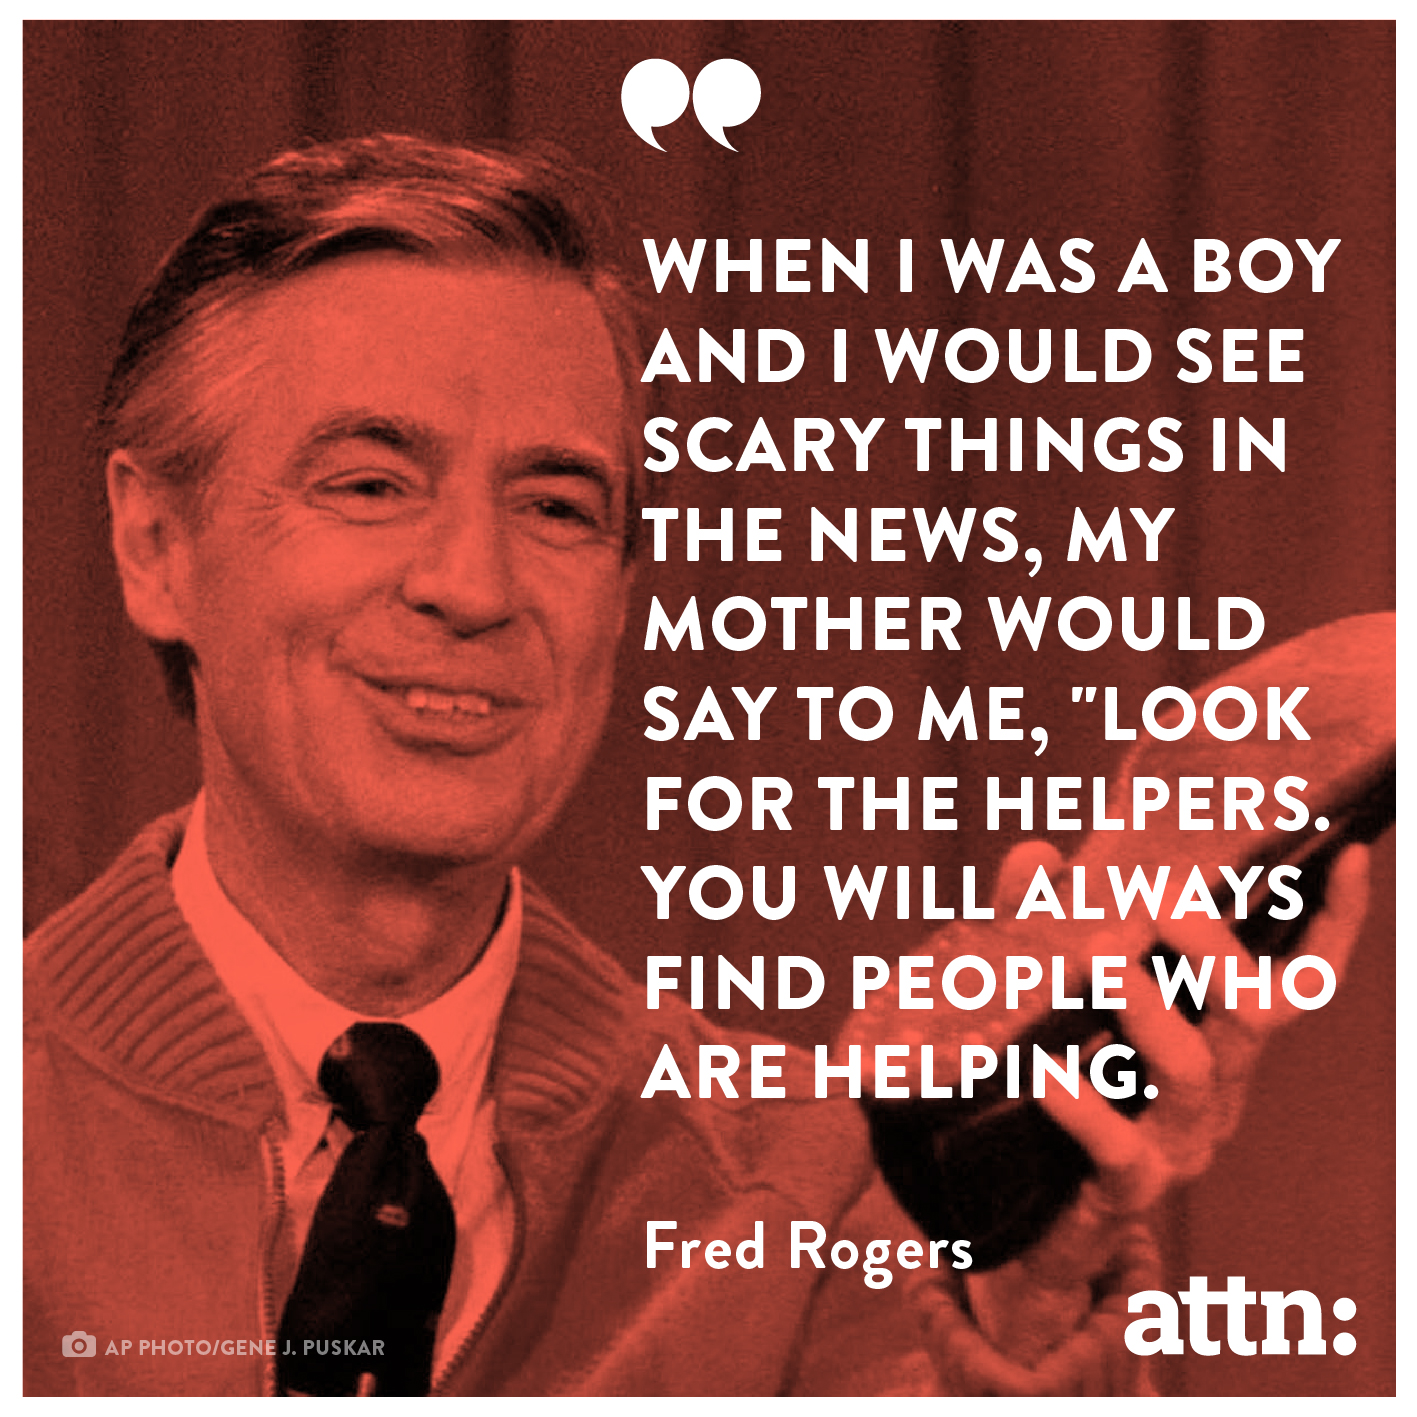 Mr. Rogers "Look for the helpers" quote